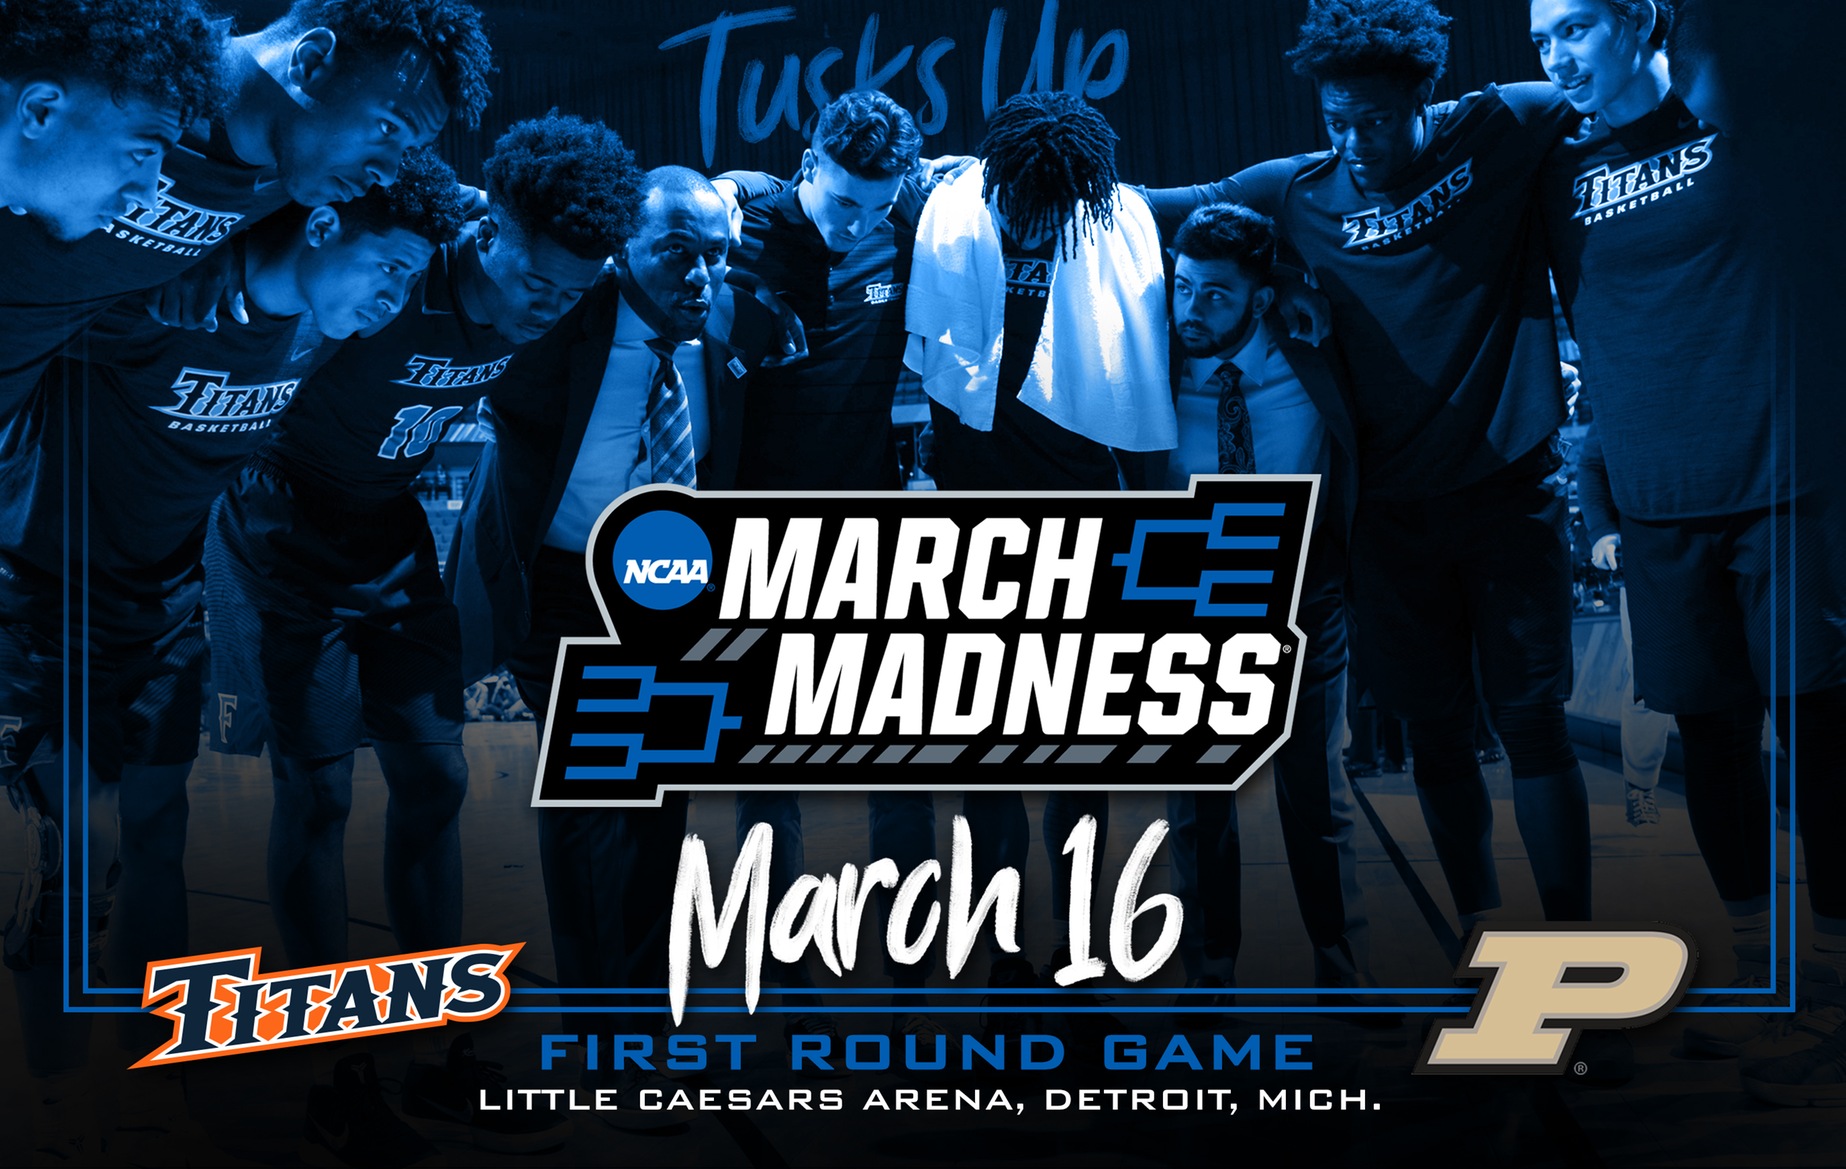 Men’s Basketball Earns No. 15 Seed in East Region, Heads to Motown to Face Purdue